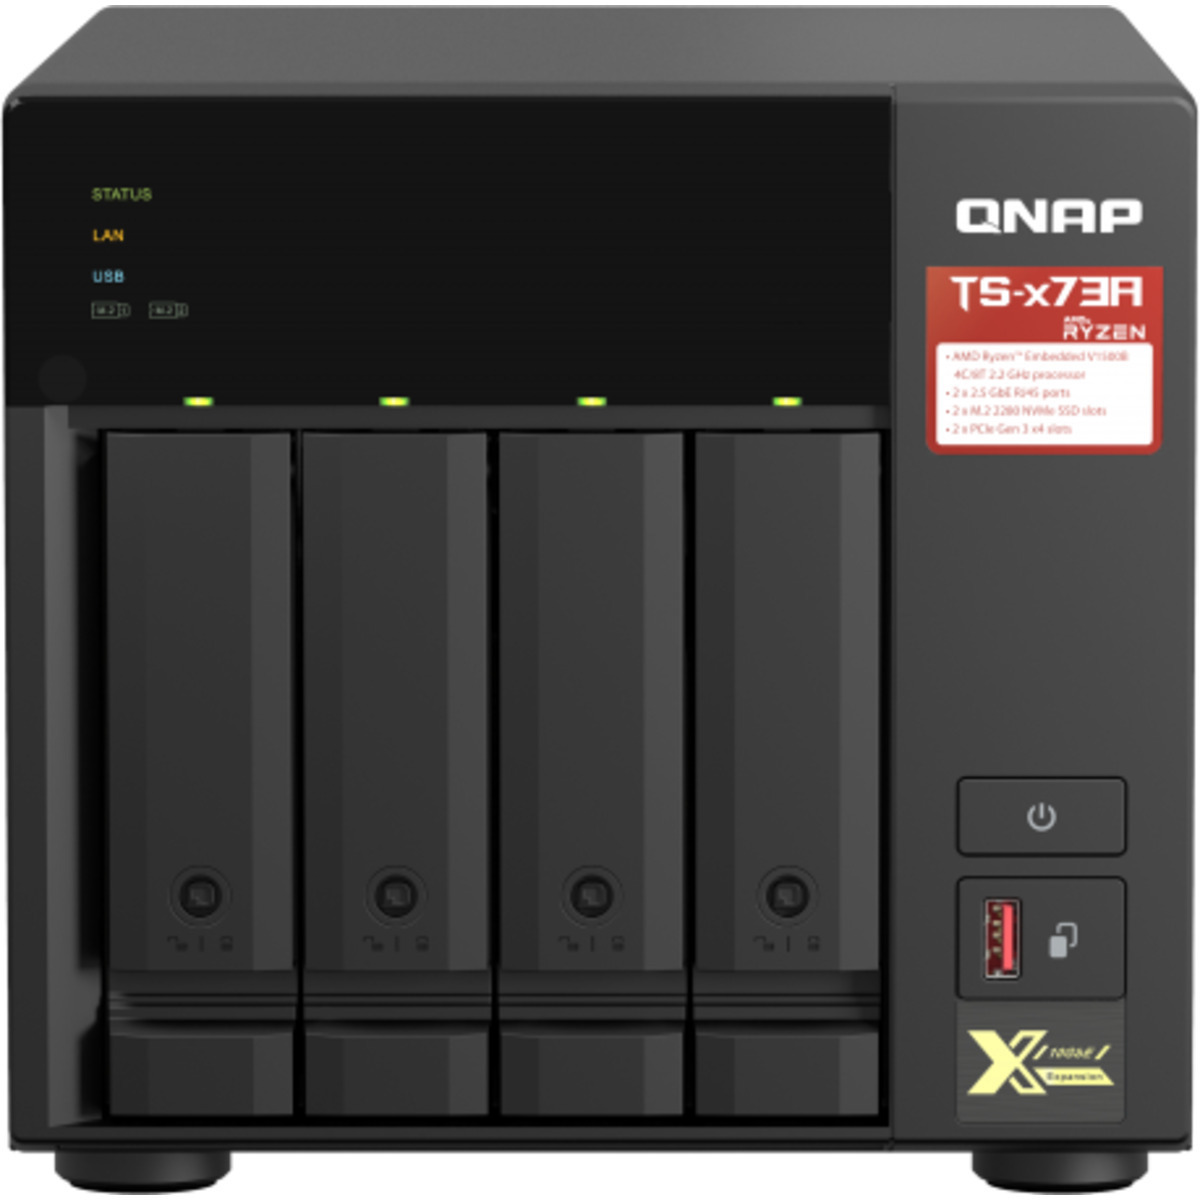 buy QNAP TS-473A 72tb Desktop NAS - Network Attached Storage Device 4x18000gb Seagate IronWolf Pro ST18000NT001 3.5 7200rpm SATA 6Gb/s HDD NAS Class Drives Installed - Burn-In Tested - nas headquarters buy network attached storage server device das new raid-5 free shipping simply usa christmas holiday black friday cyber monday week sale happening now! TS-473A